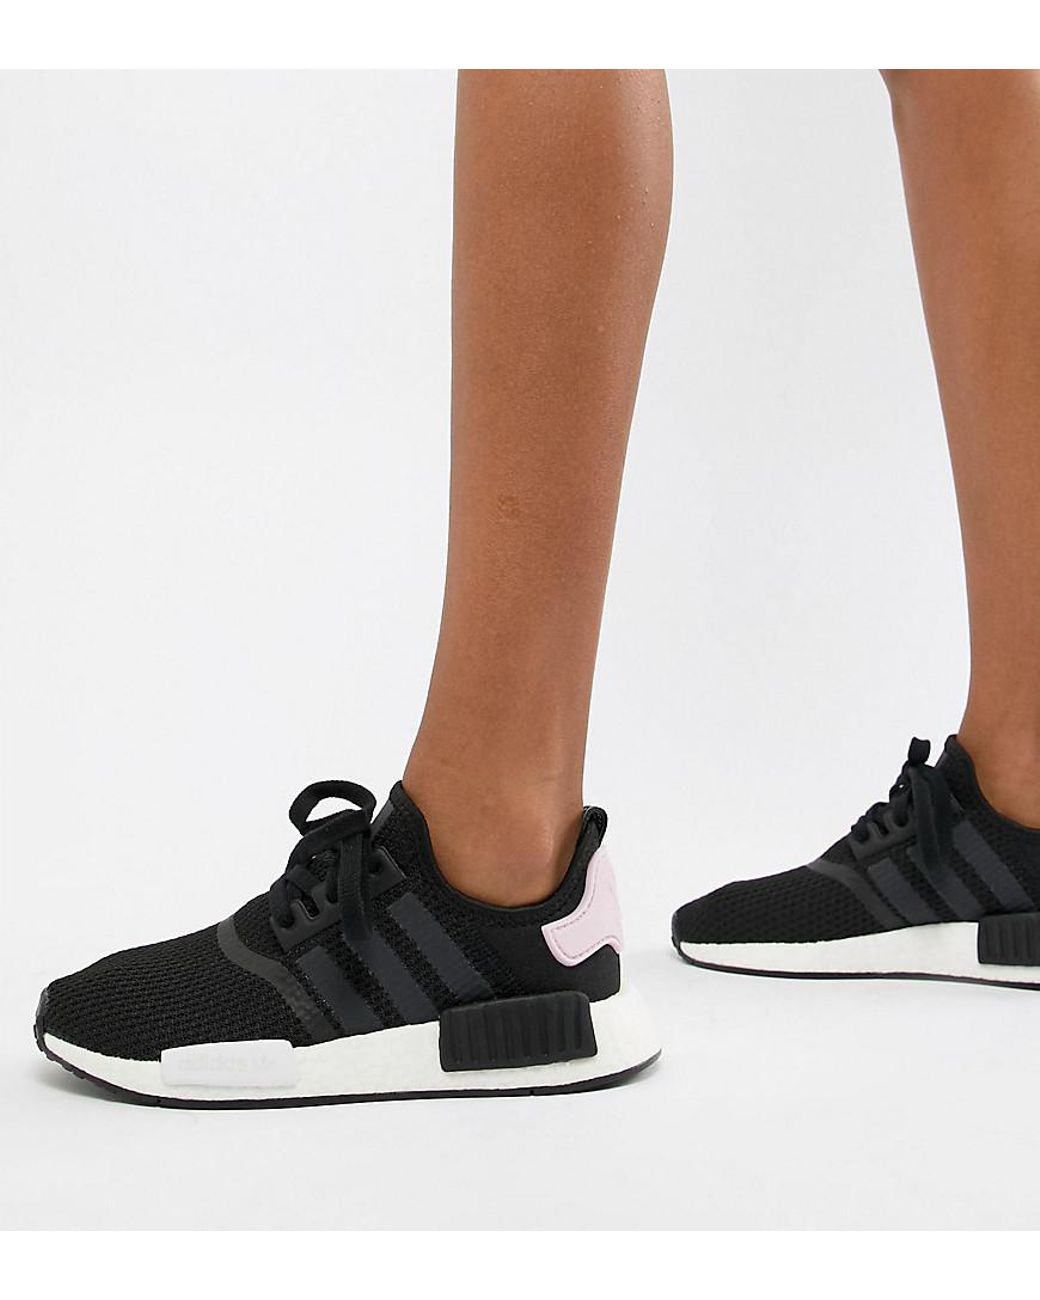 adidas Originals Nmd R1 Sneakers In Black And Pink | Lyst